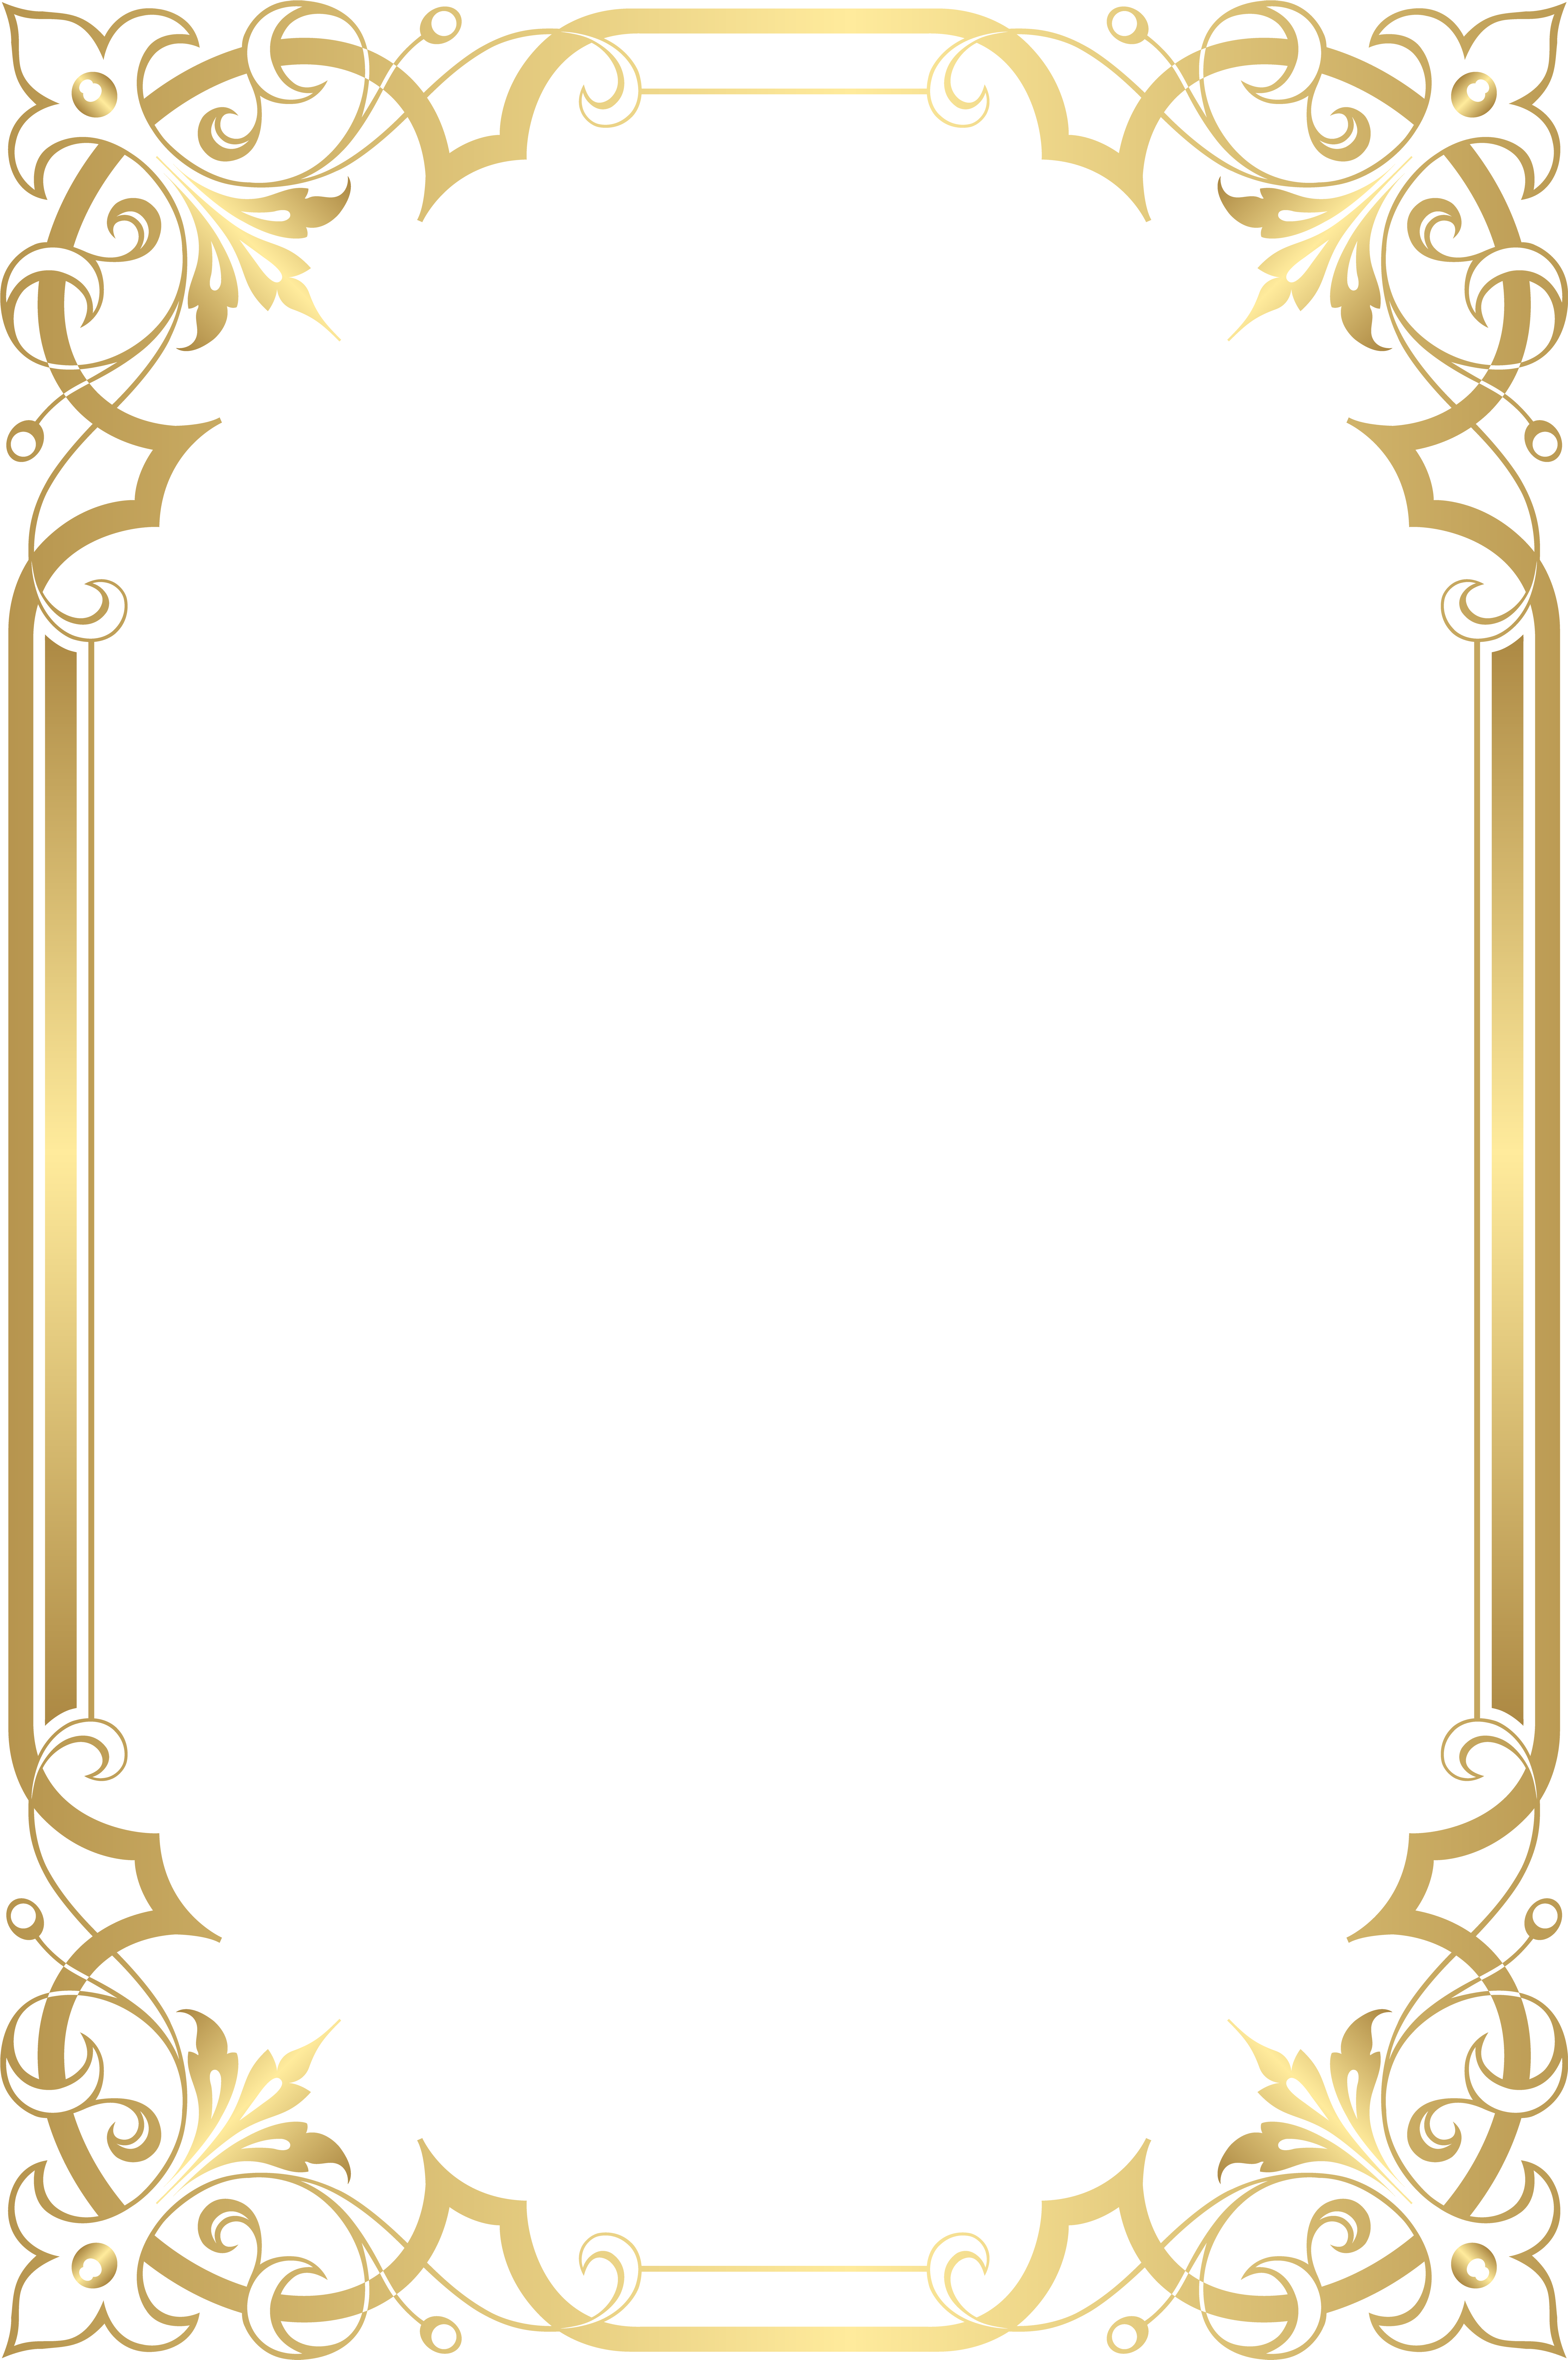 Image Border, Borders For Paper, Borders And Frames, - Gold Border Frame Png (5317x8000), Png Download